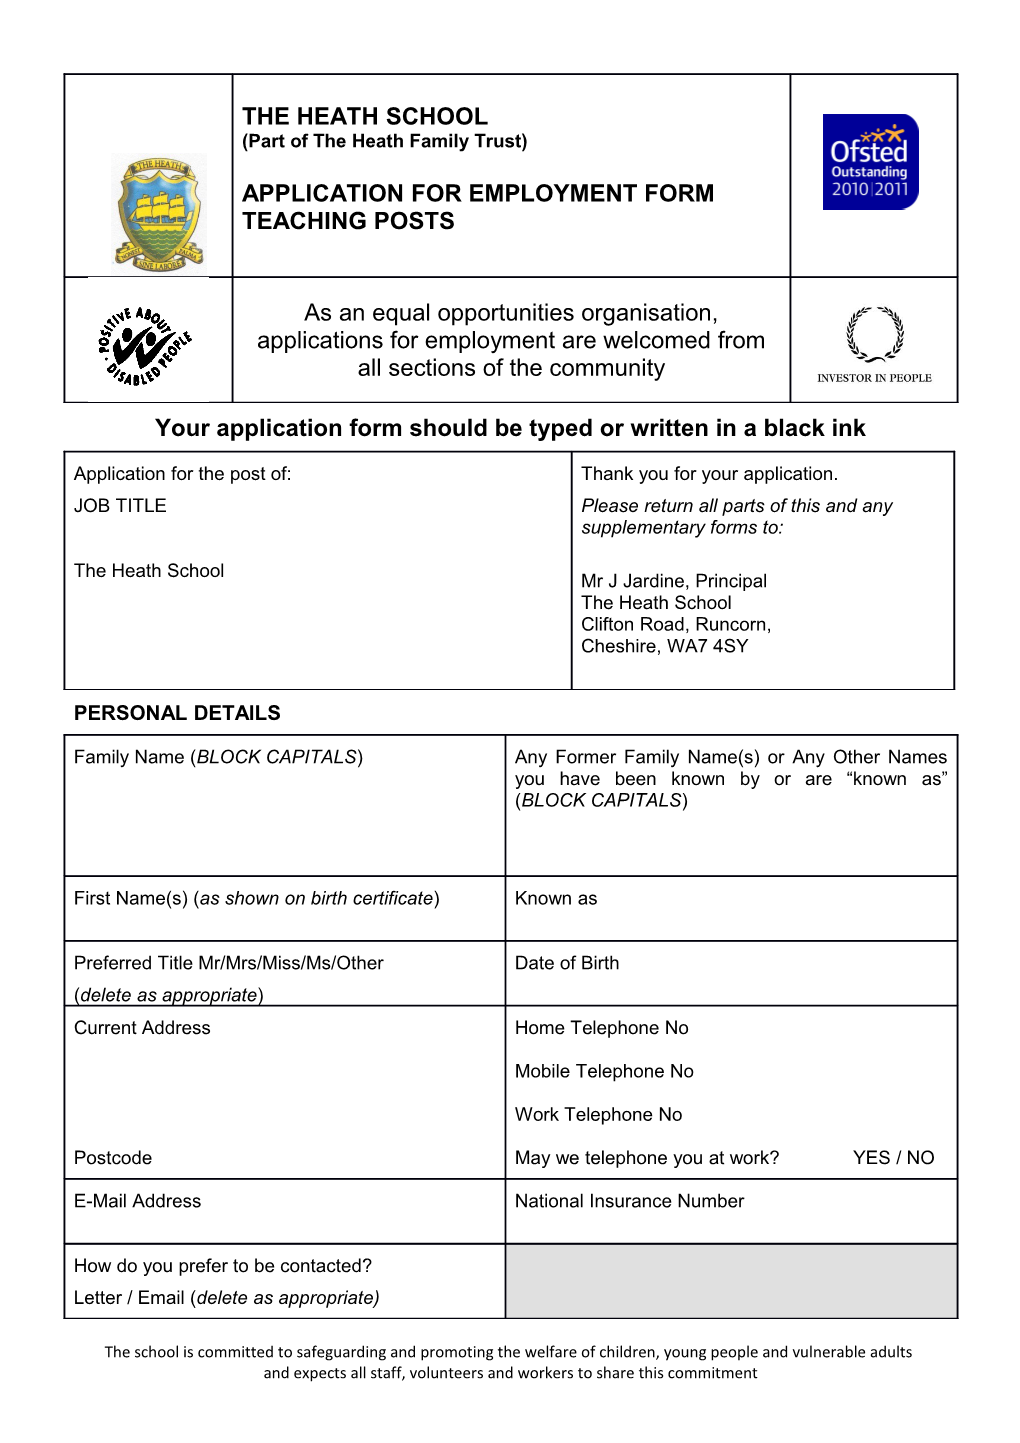 Application for Employment Form s4